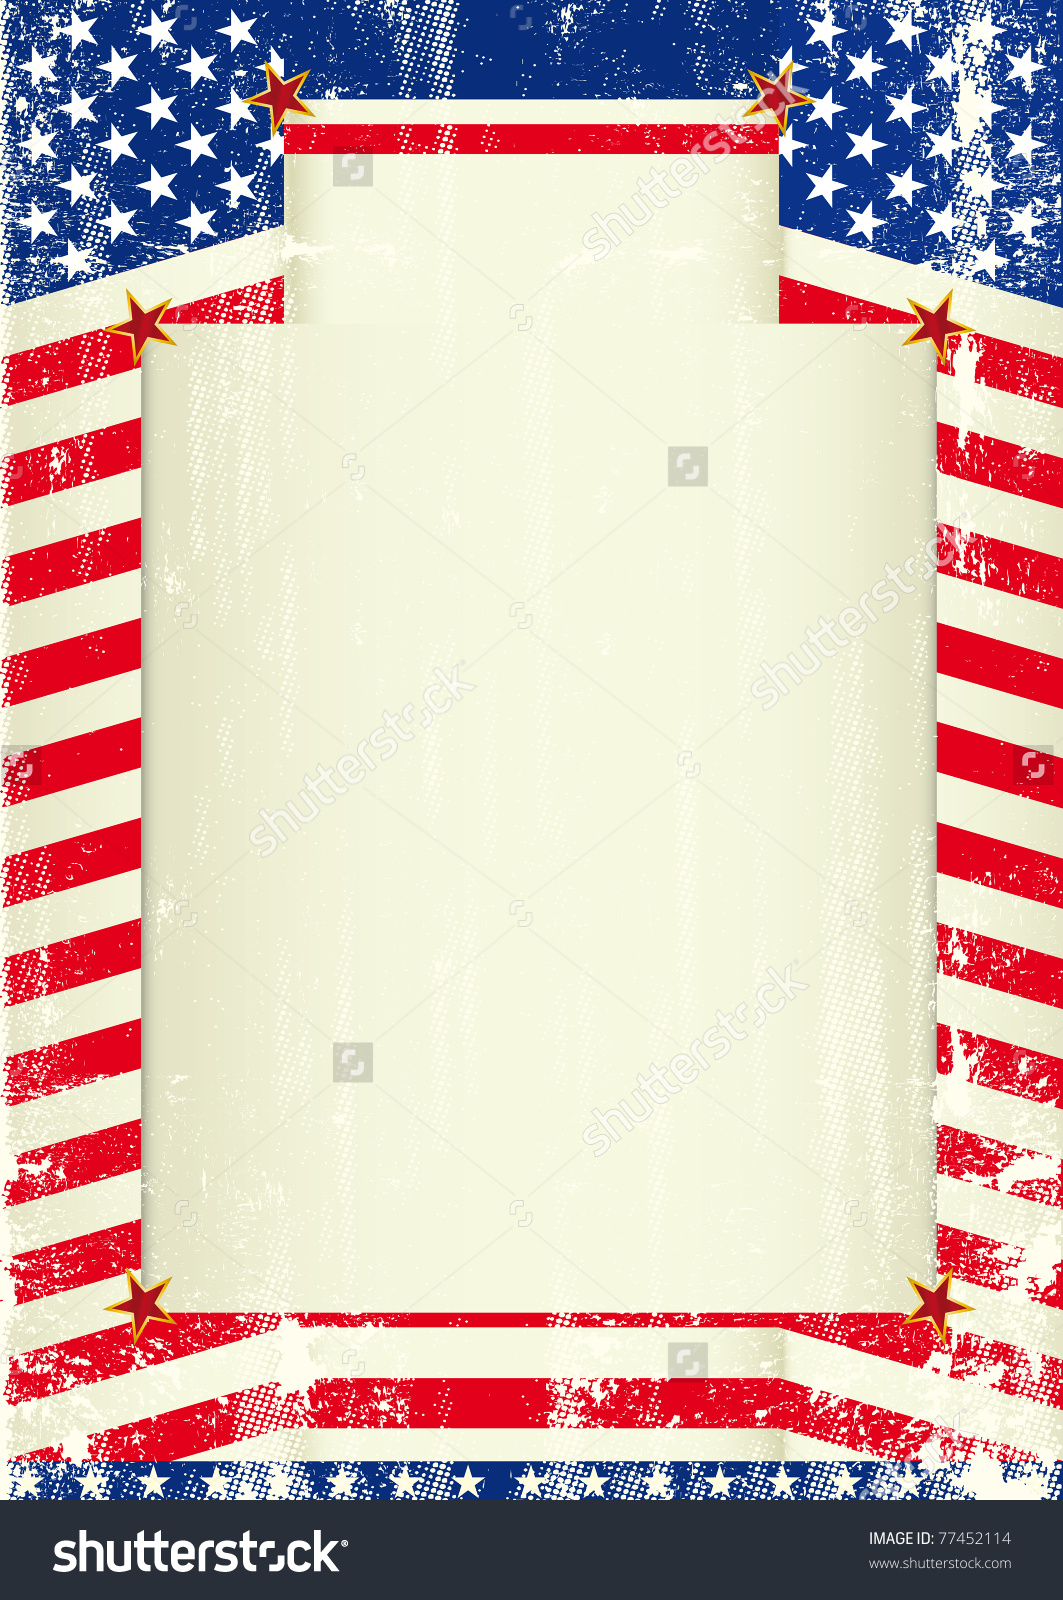 Patriotic Background Images II22 High Definition